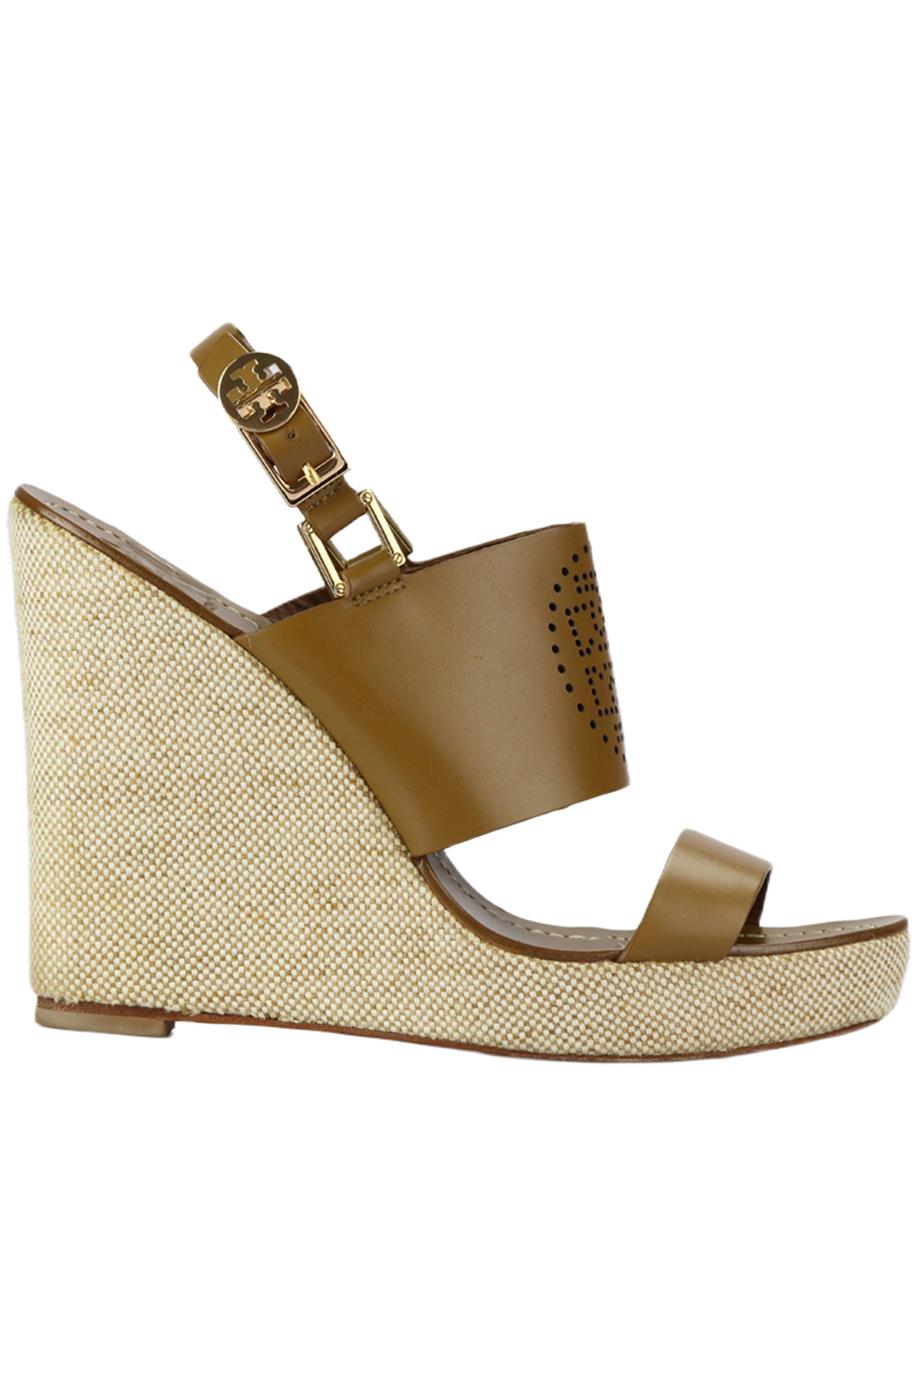 TORY BURCH LEATHER AND CANVAS WEDGE SANDALS EU 39.5 UK 6.5 US 9.5